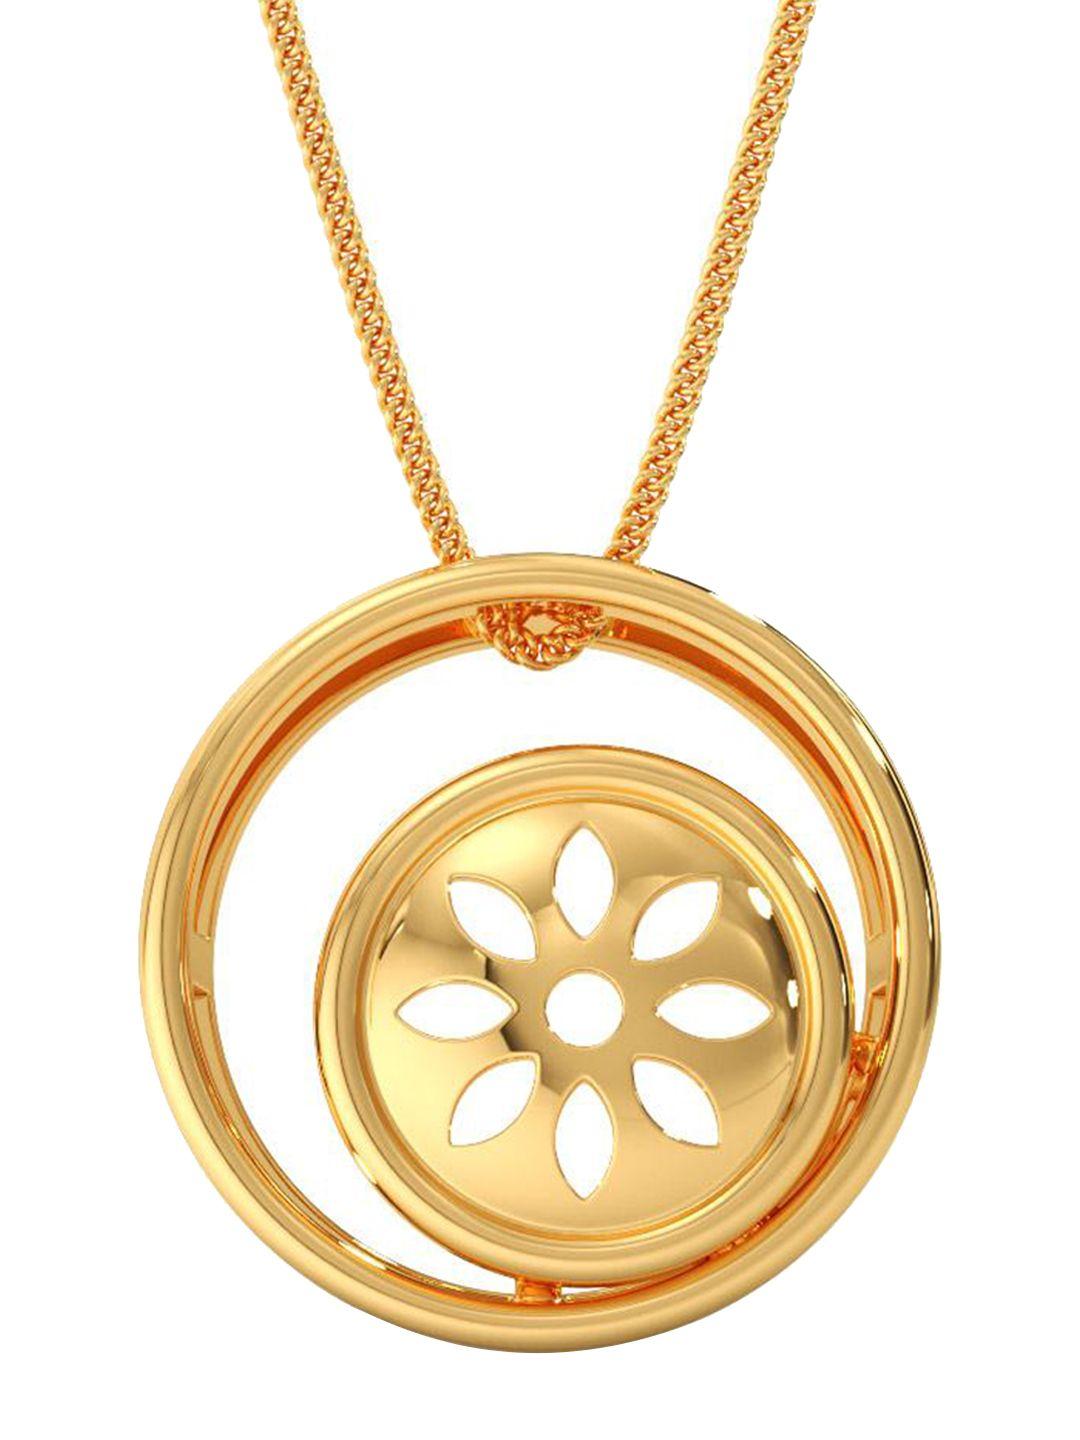 candere a kalyan jewellers company 14k yellow gold round shaped pendant